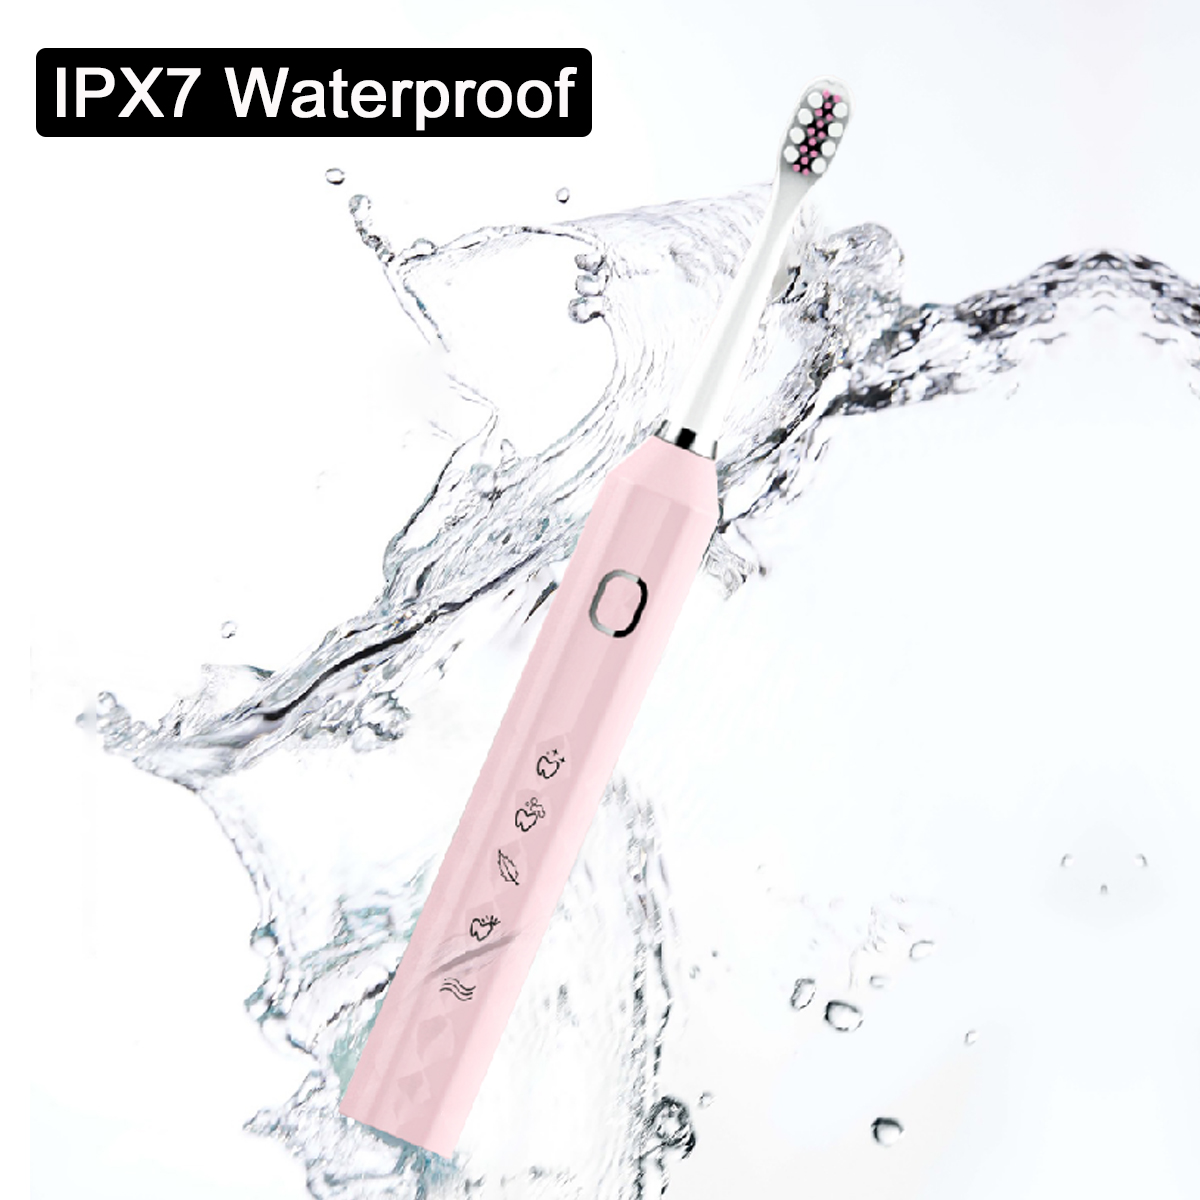 18000rpm-Electric-Toothbrush-5-Modes-Tooth-Cleaner-IPX7-Waterproof-For-Above-Over-12-Years-Old-1869980-4